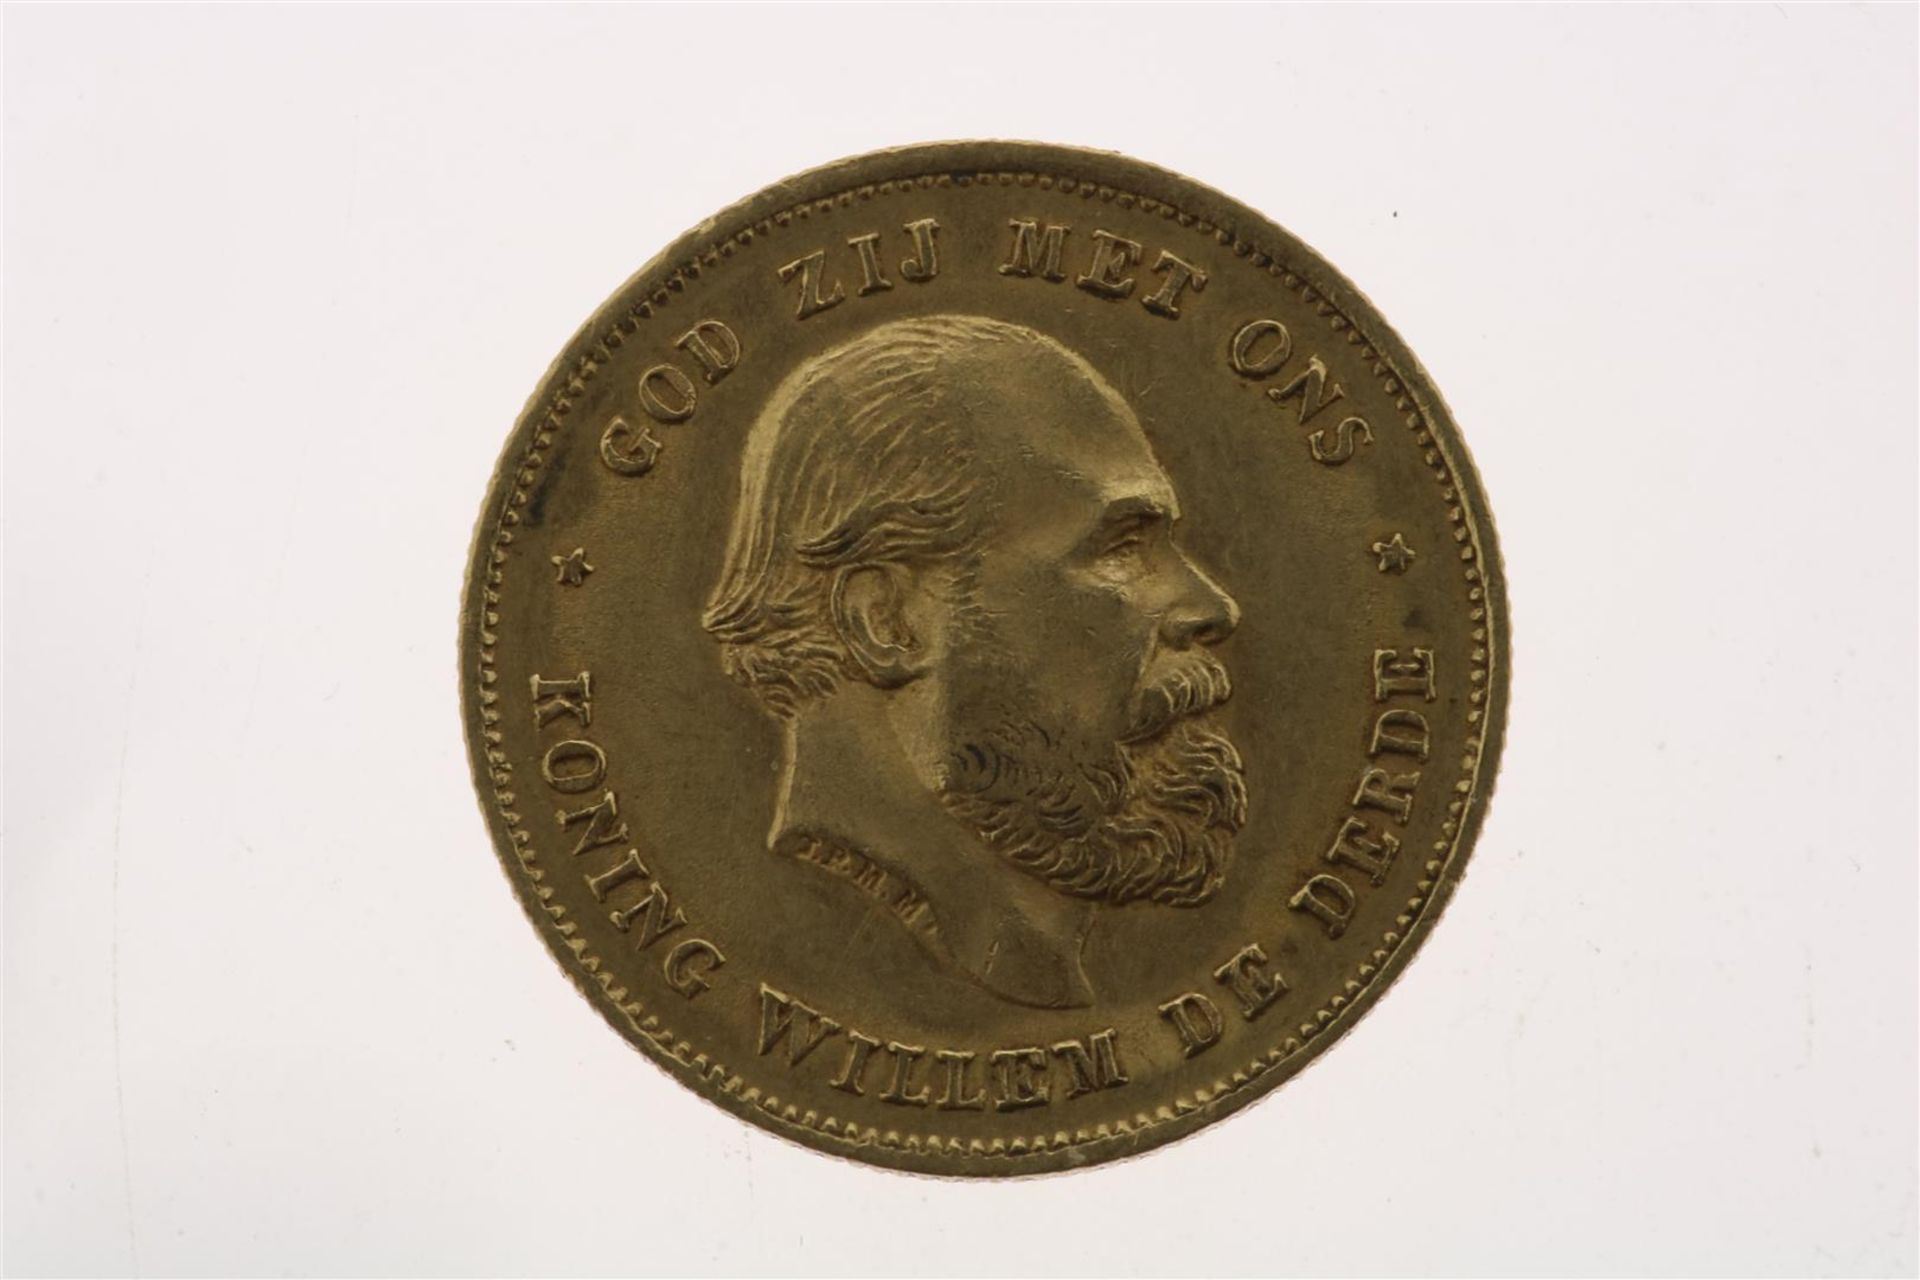 Gold tenner with image of Willem III, looking to the right, 1875, weight 6.72 grams.